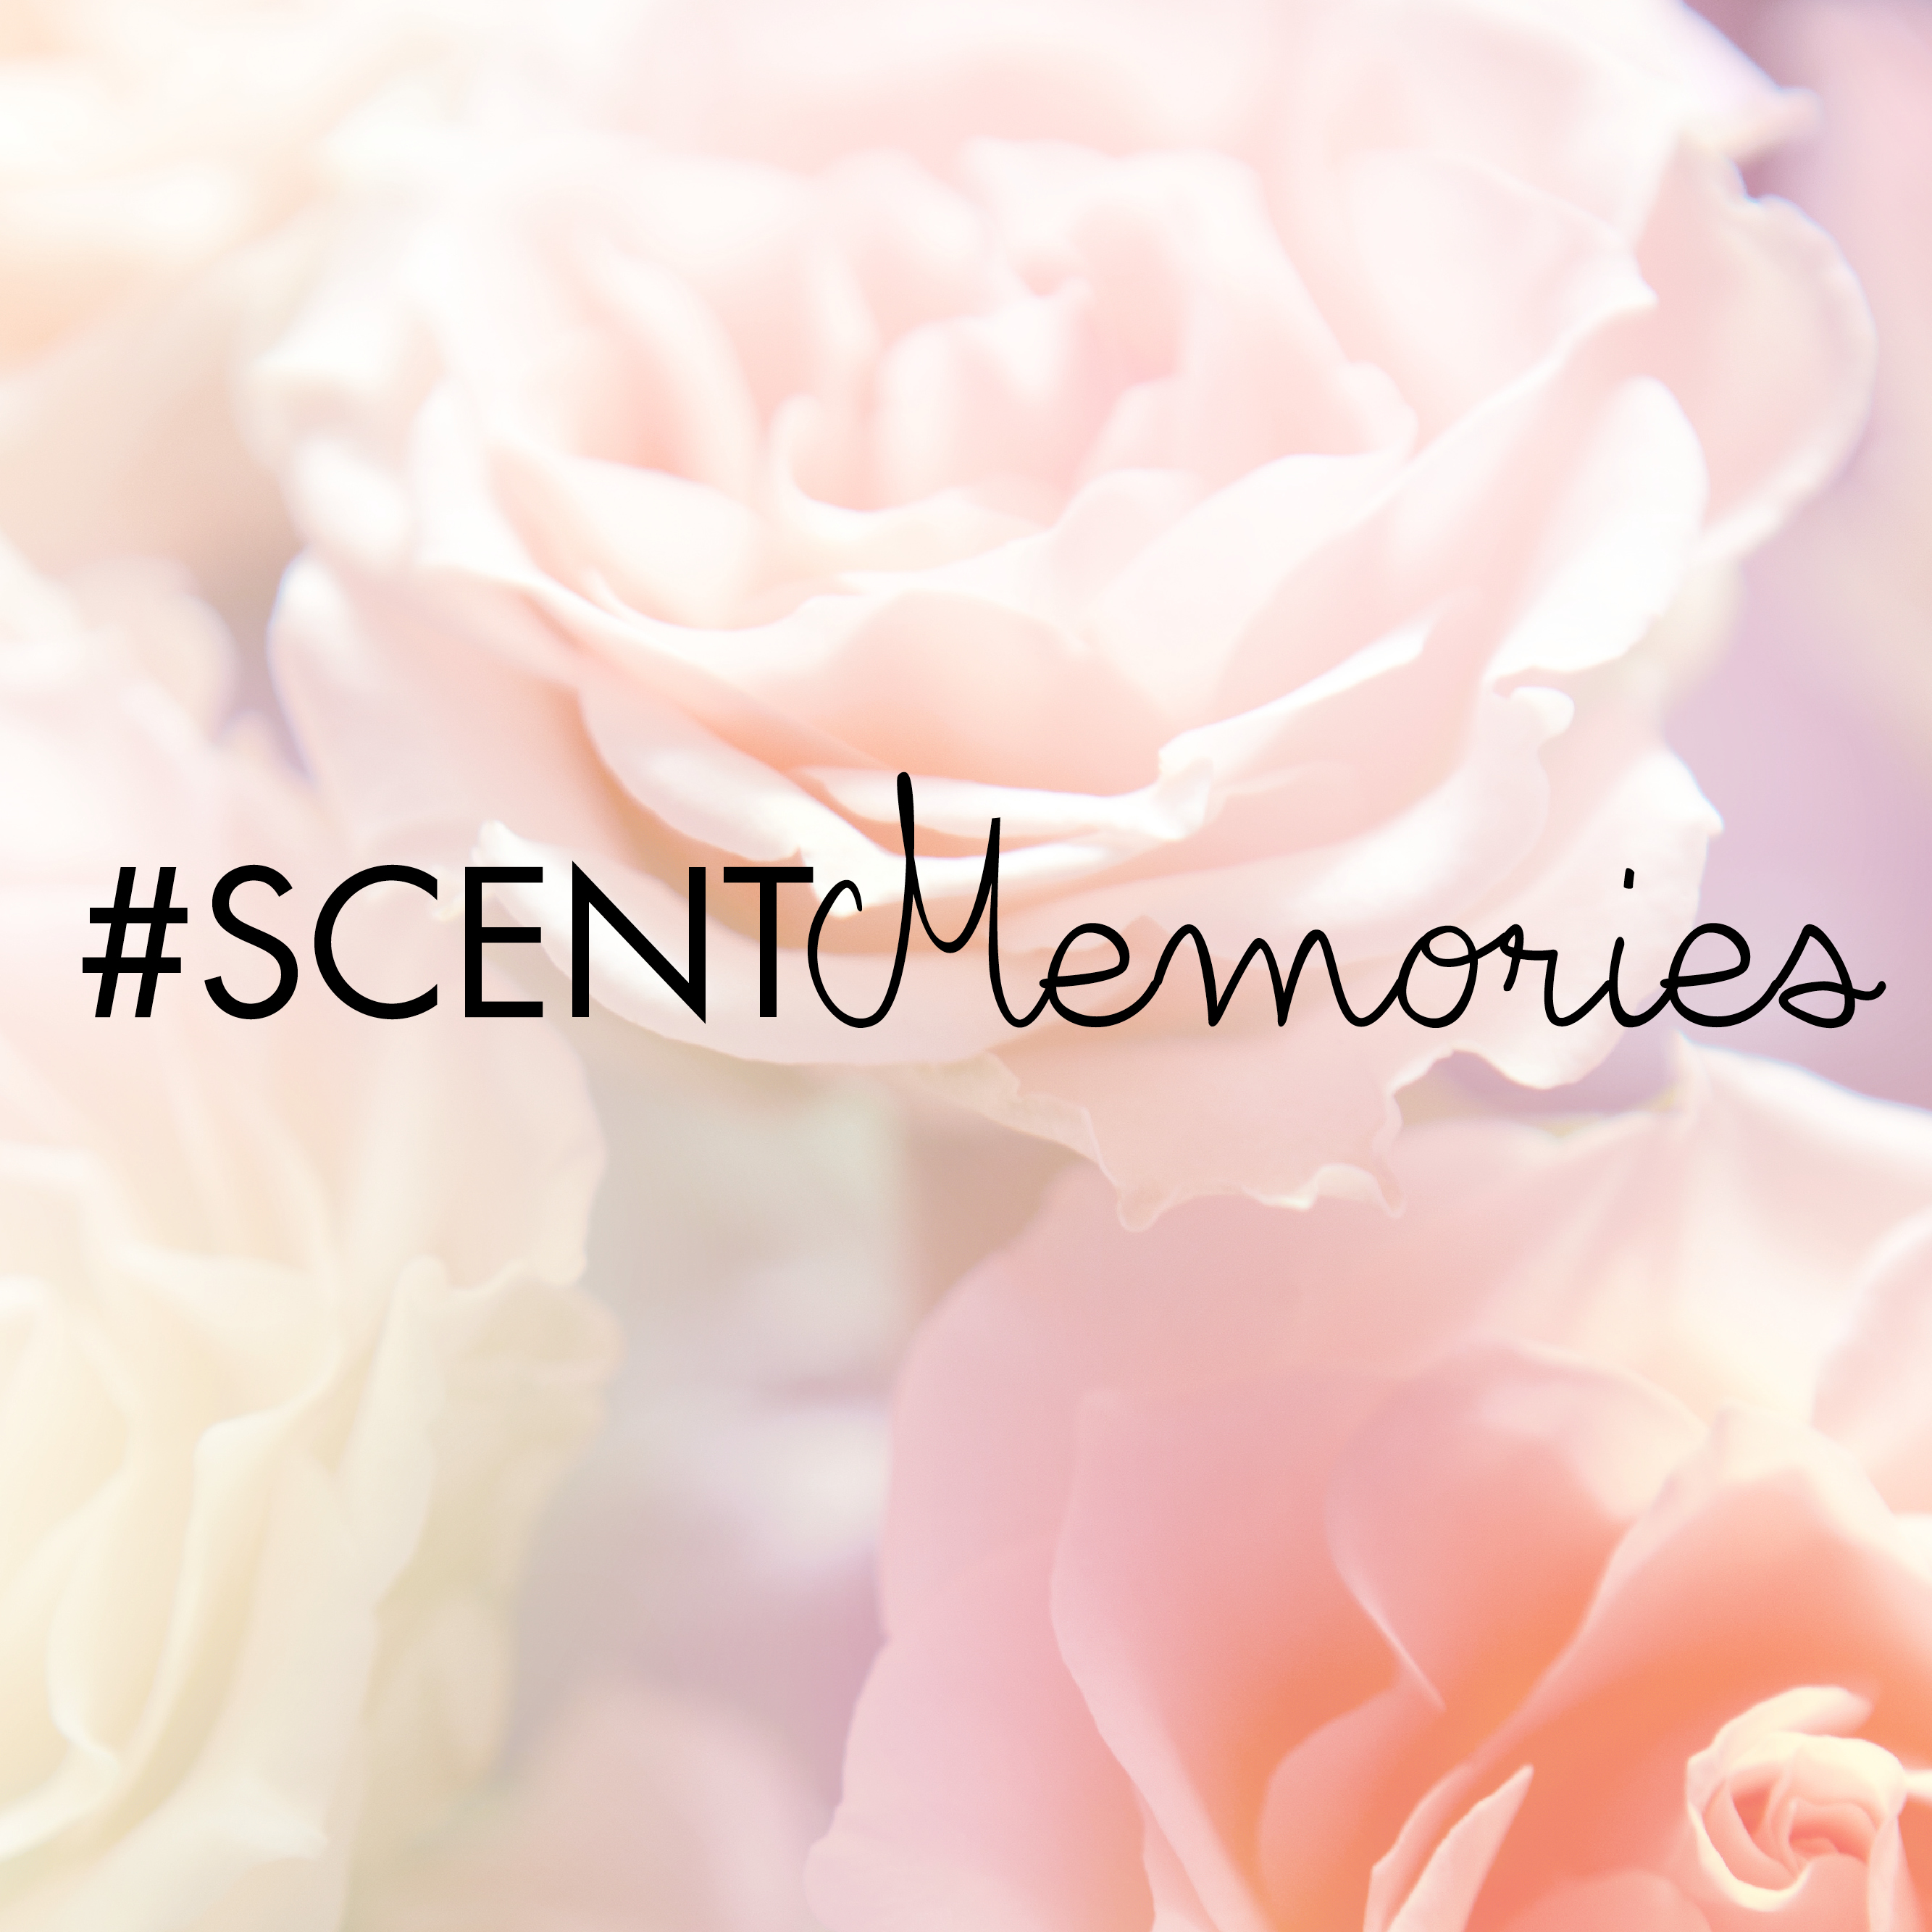 Happy National Fragrance Day! #TEAMTPS share their #ScentMemories